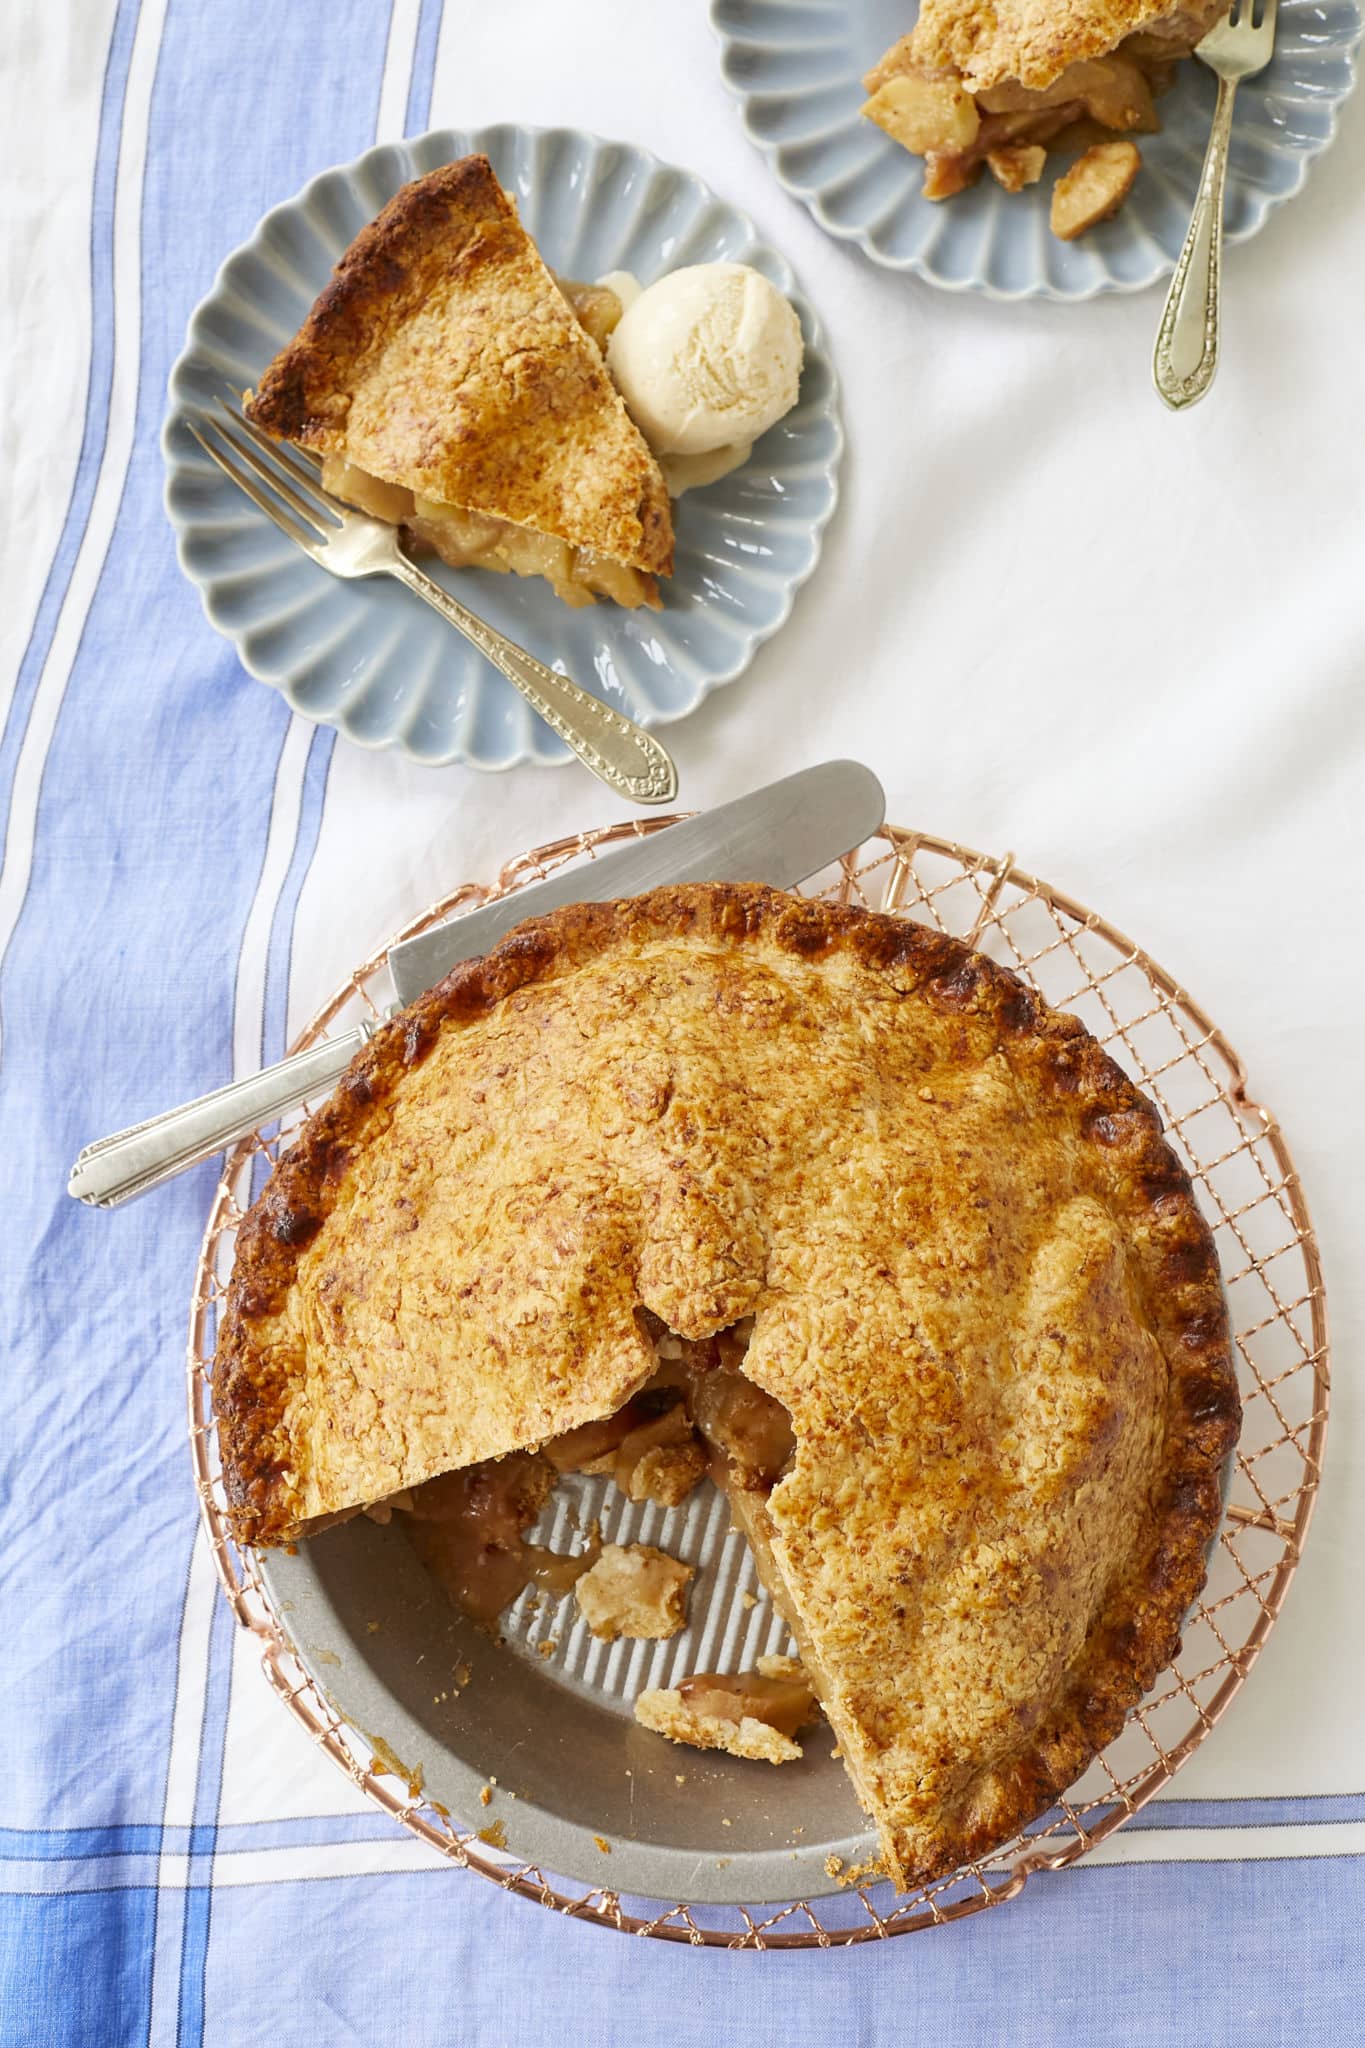 Homemade cheddar apple pie is served from the baking dish. Flecks of cheddar cheese can be seen in the crispy pie crust.